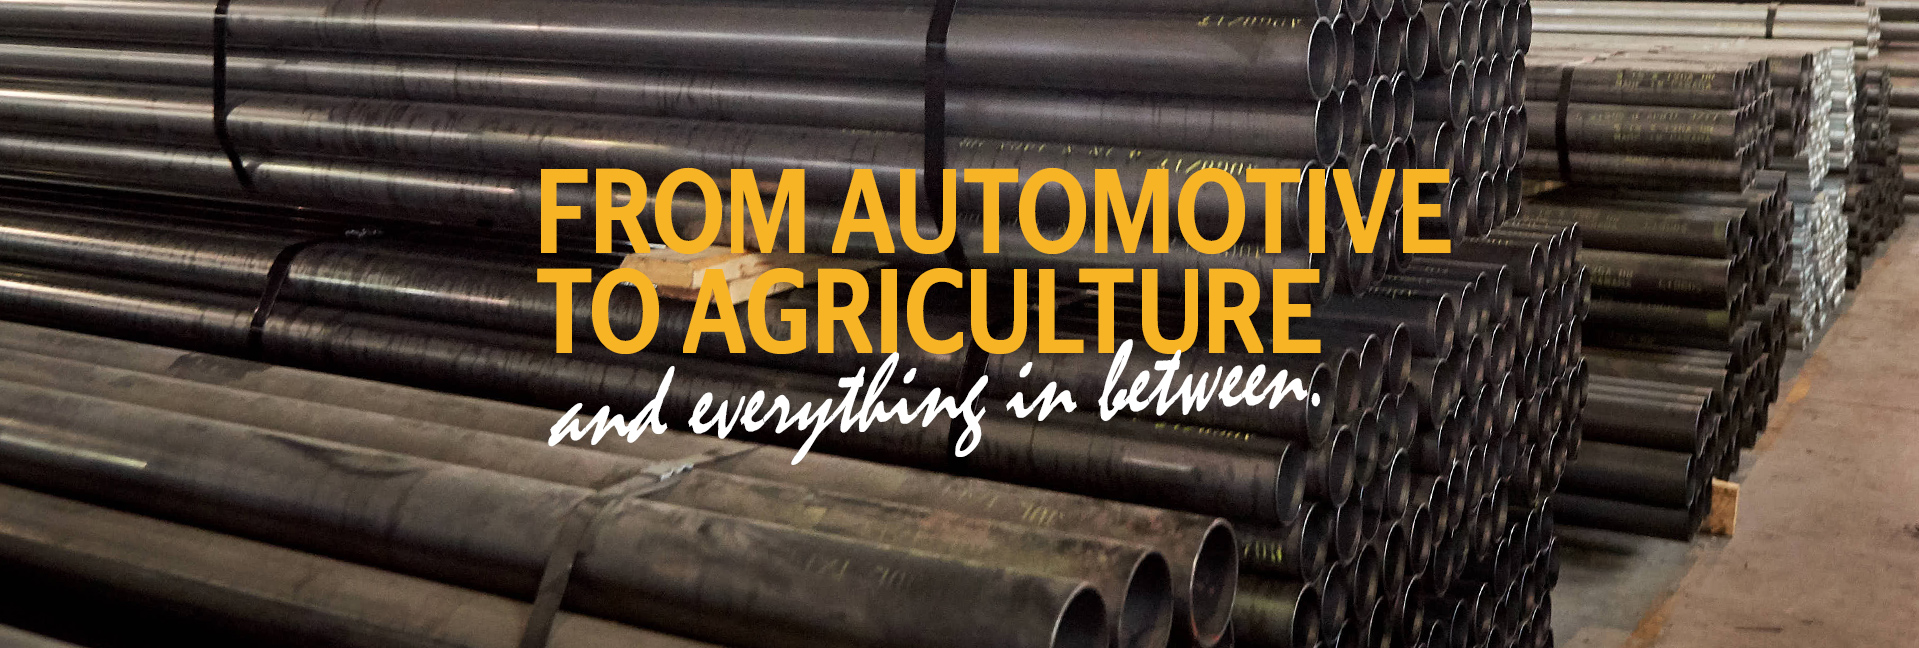 From automotive to agriculture and everything in between